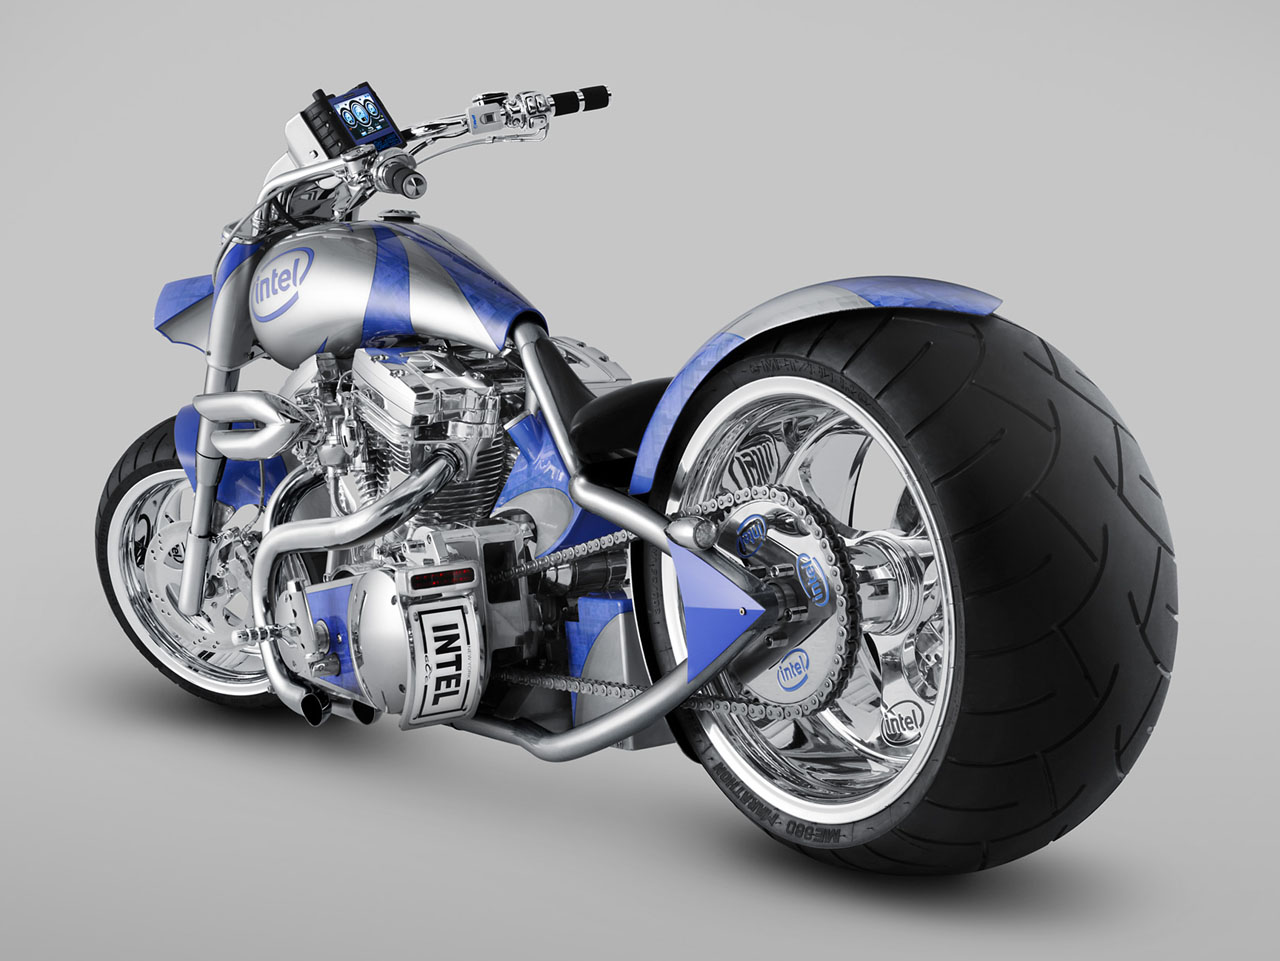 Free download Orange County Choppers Orange County Choppers Photos